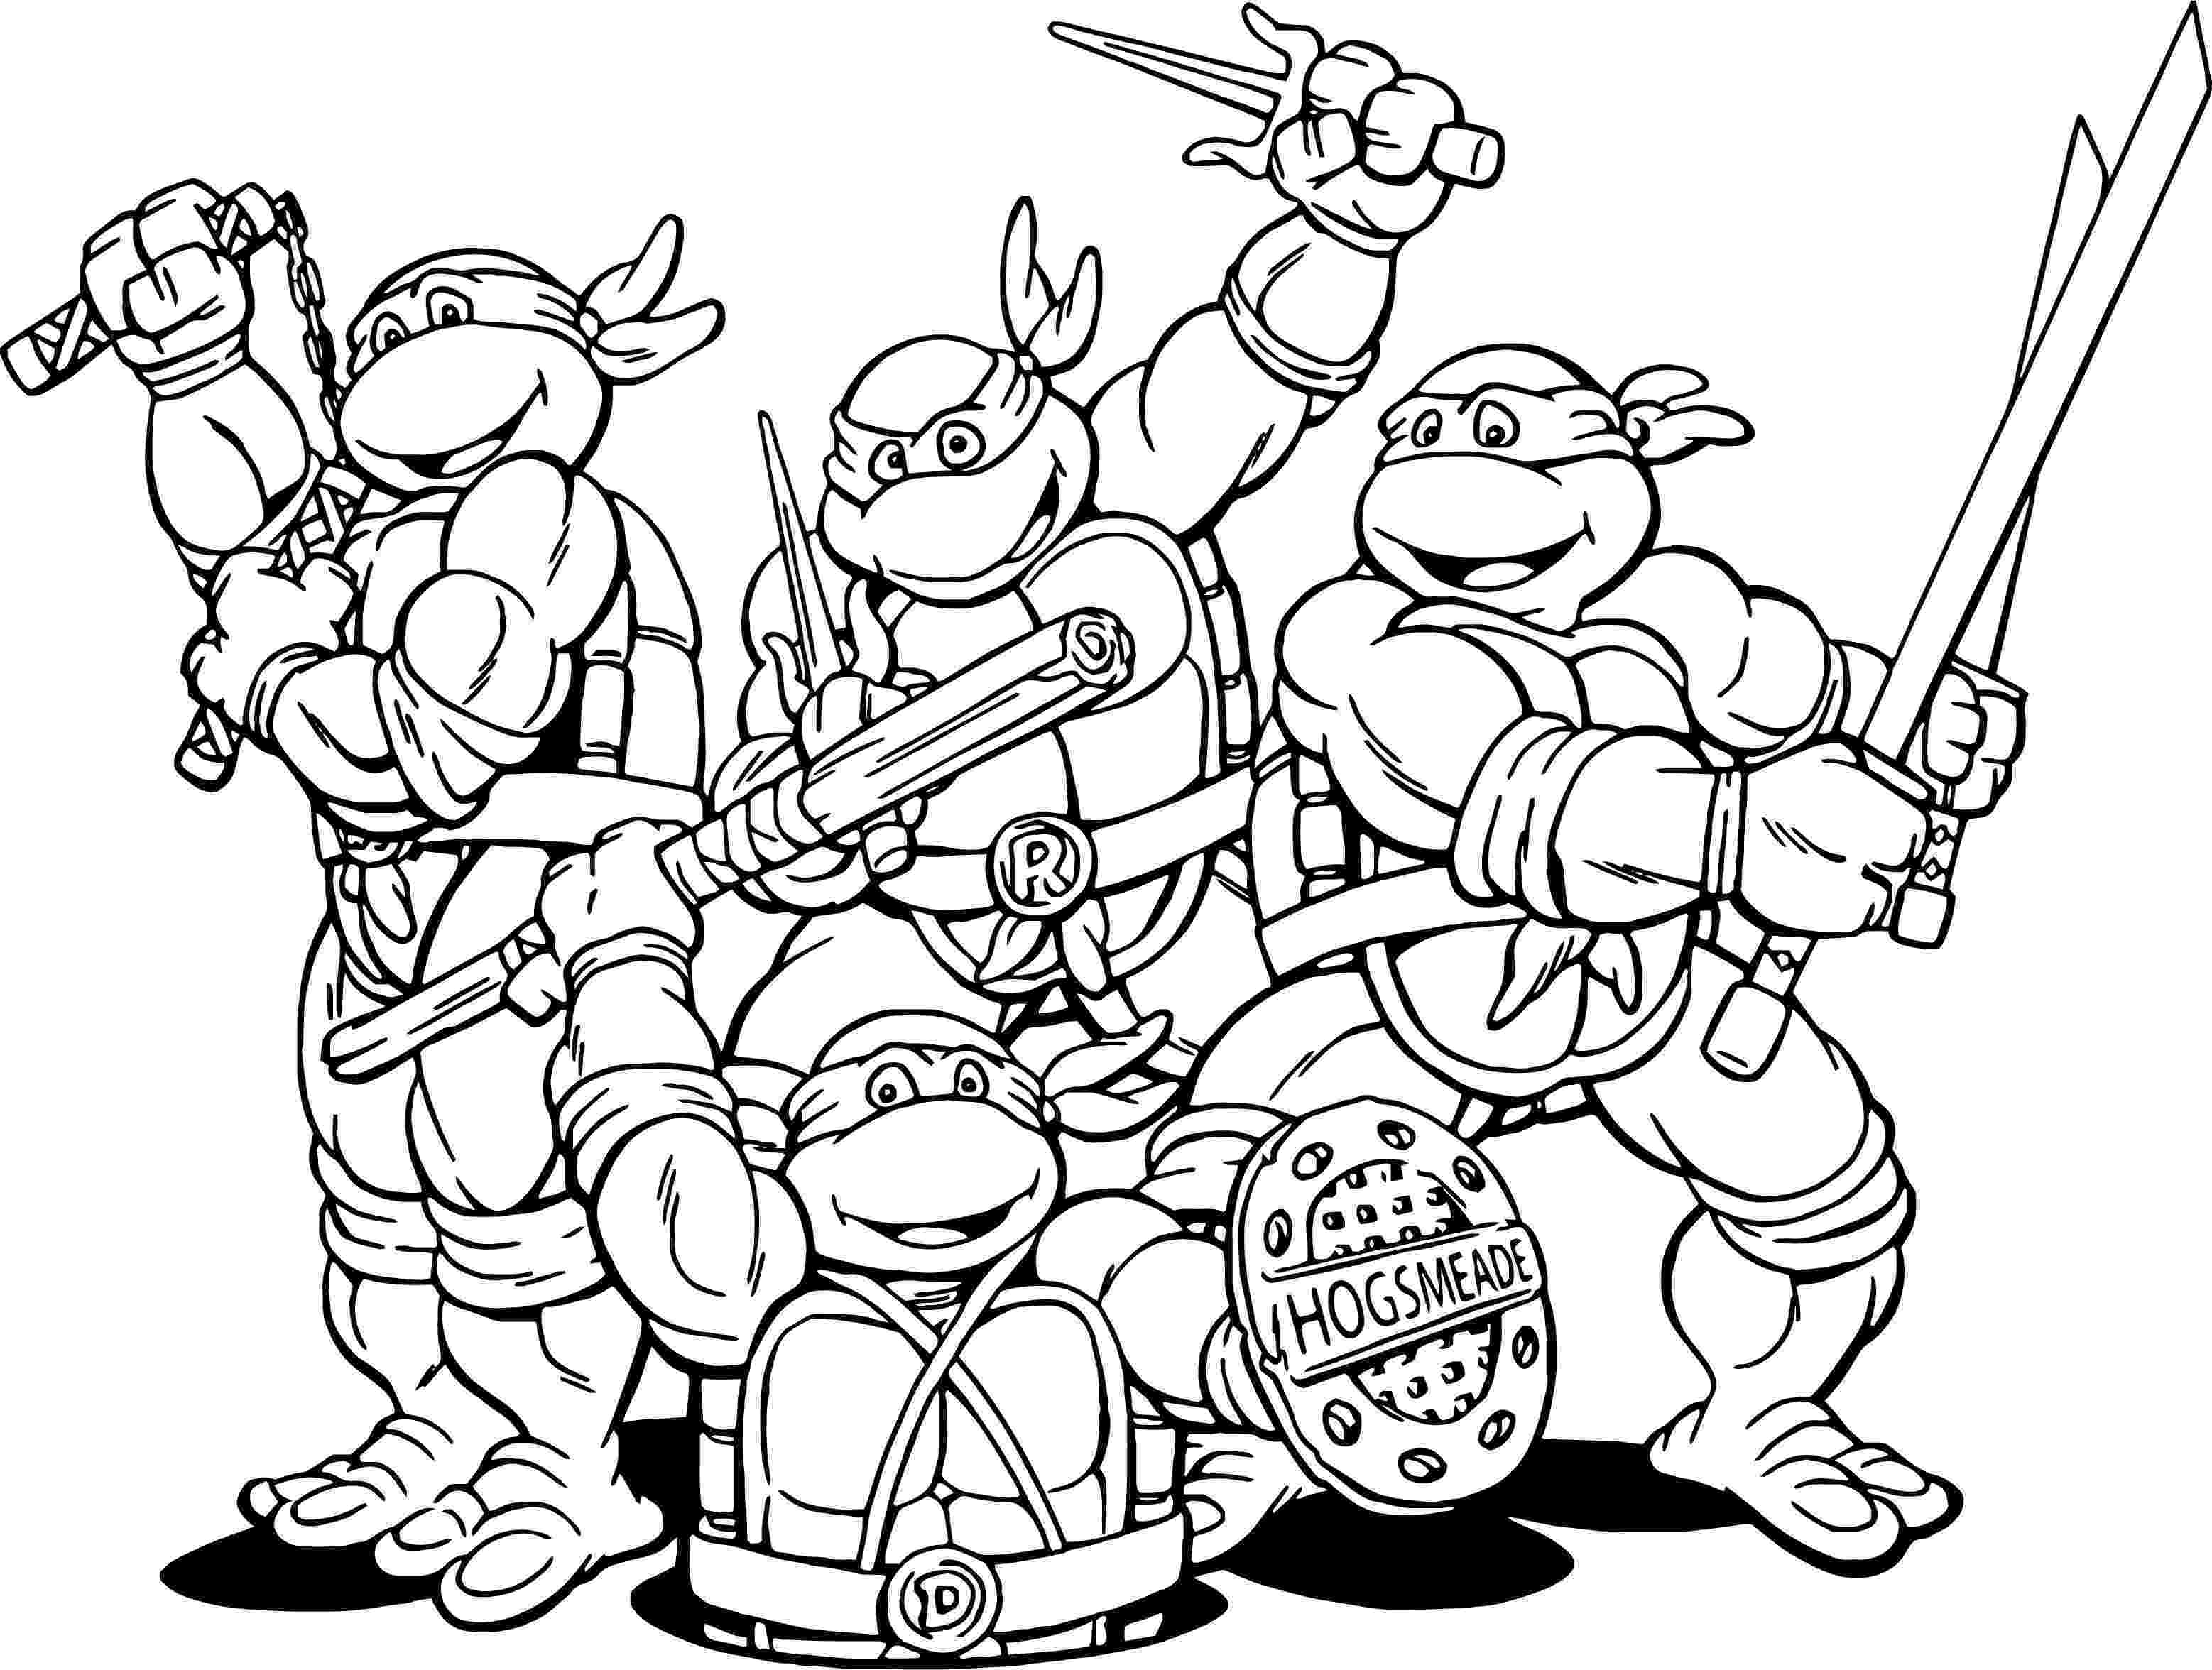 colouring pages ninja turtles teenage mutant ninja turtles cartoon coloring page turtles ninja colouring pages 